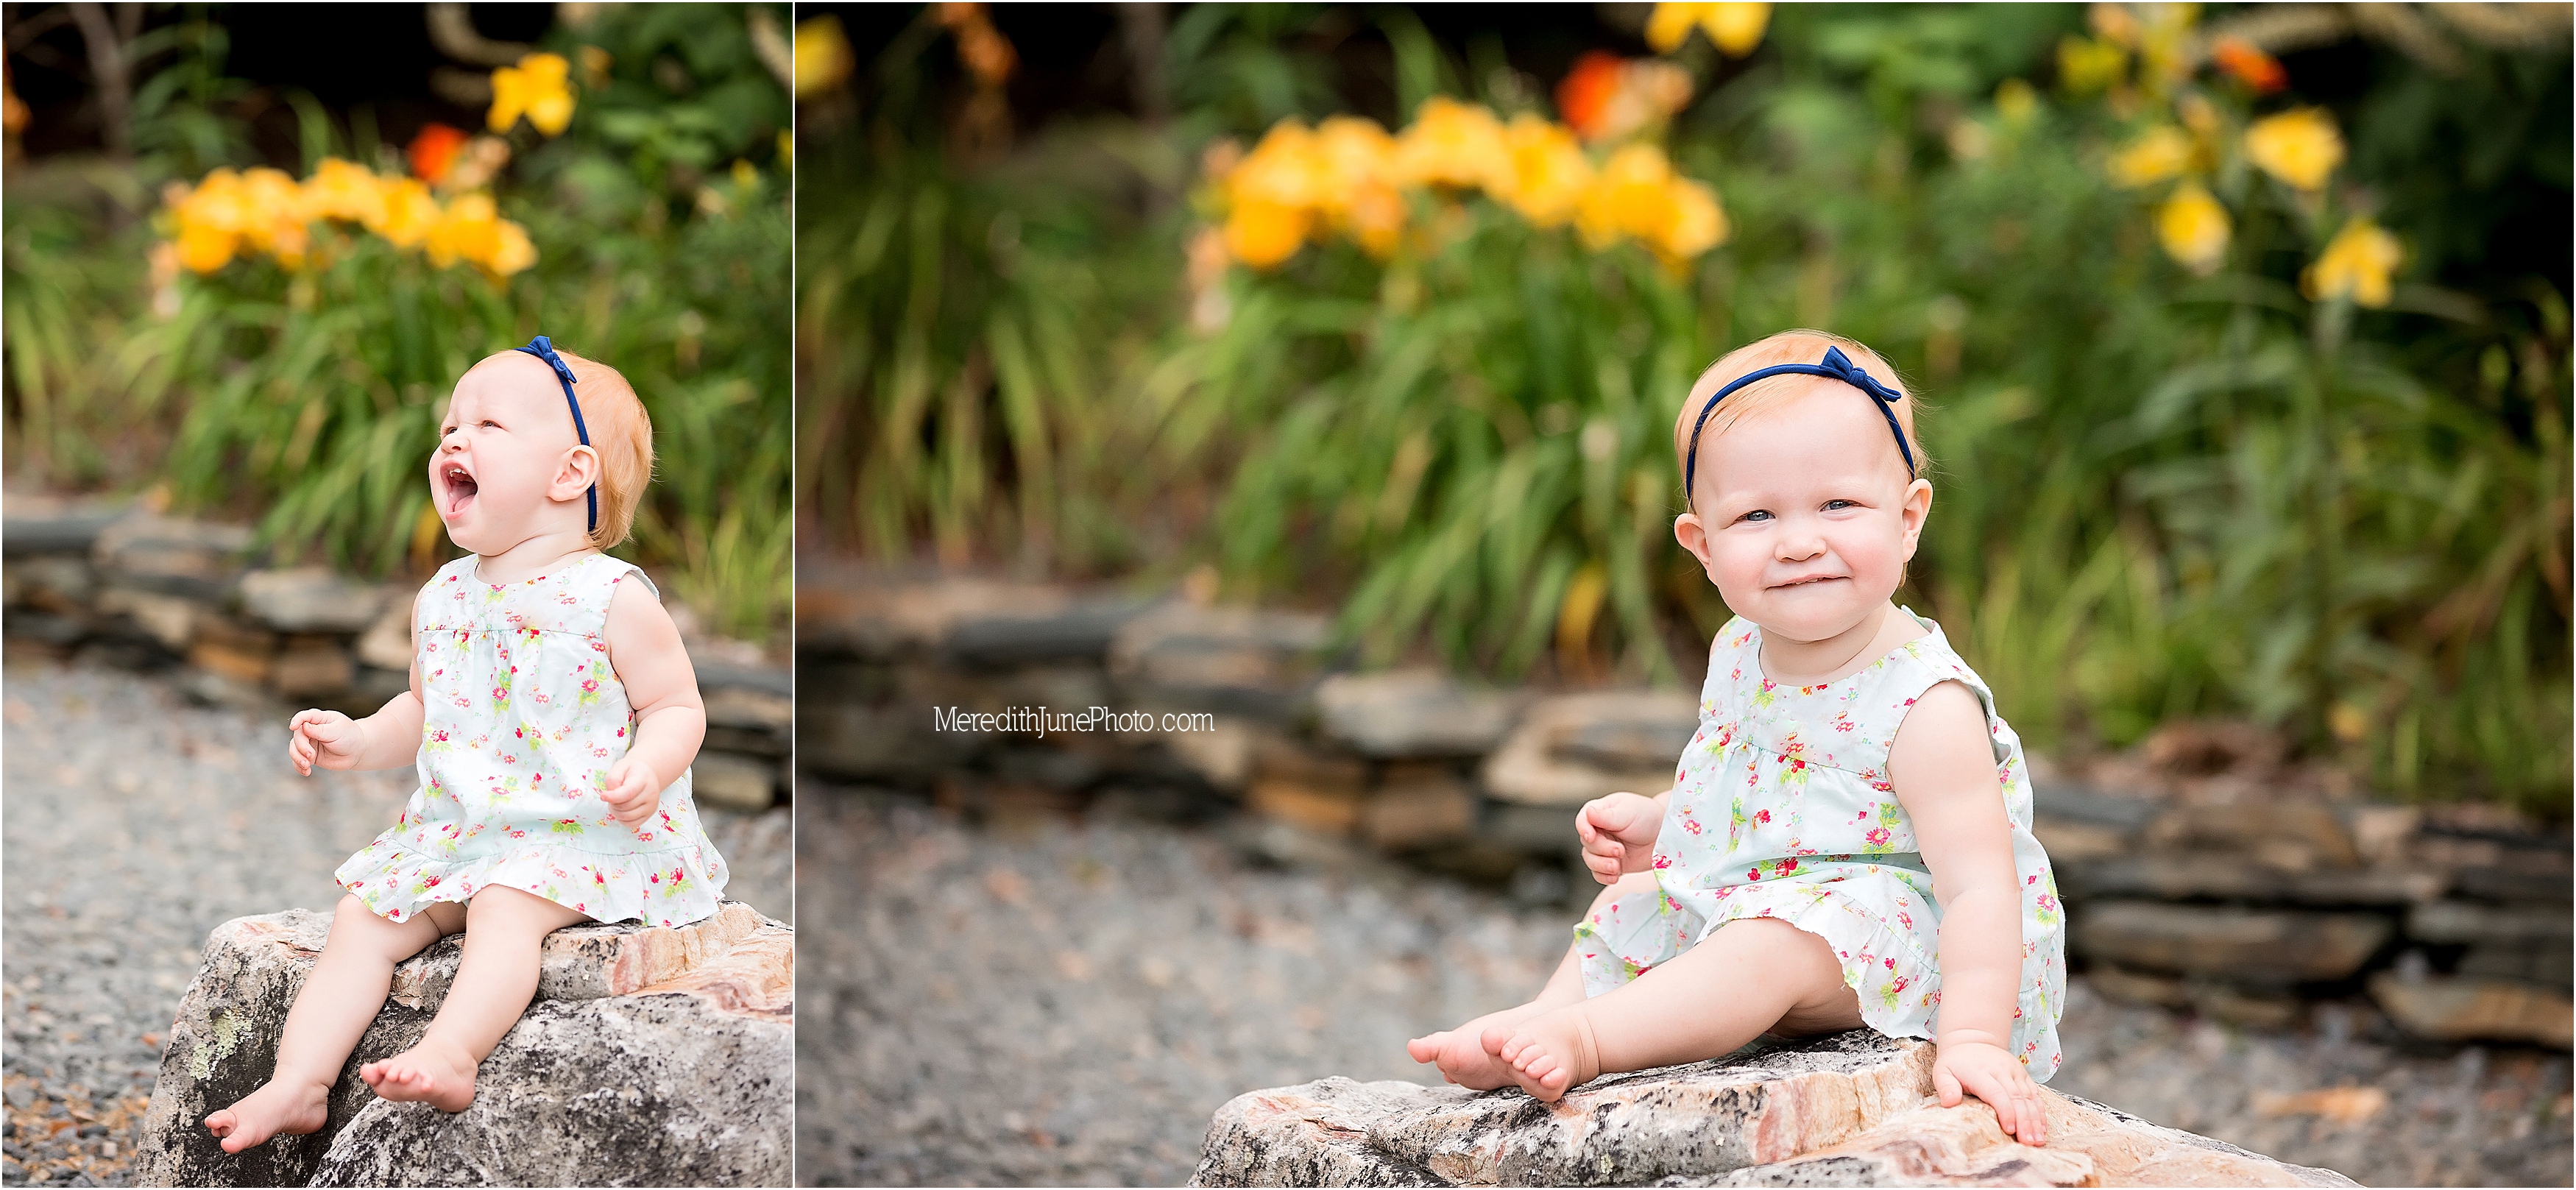 Outdoor first birthday session for baby girl